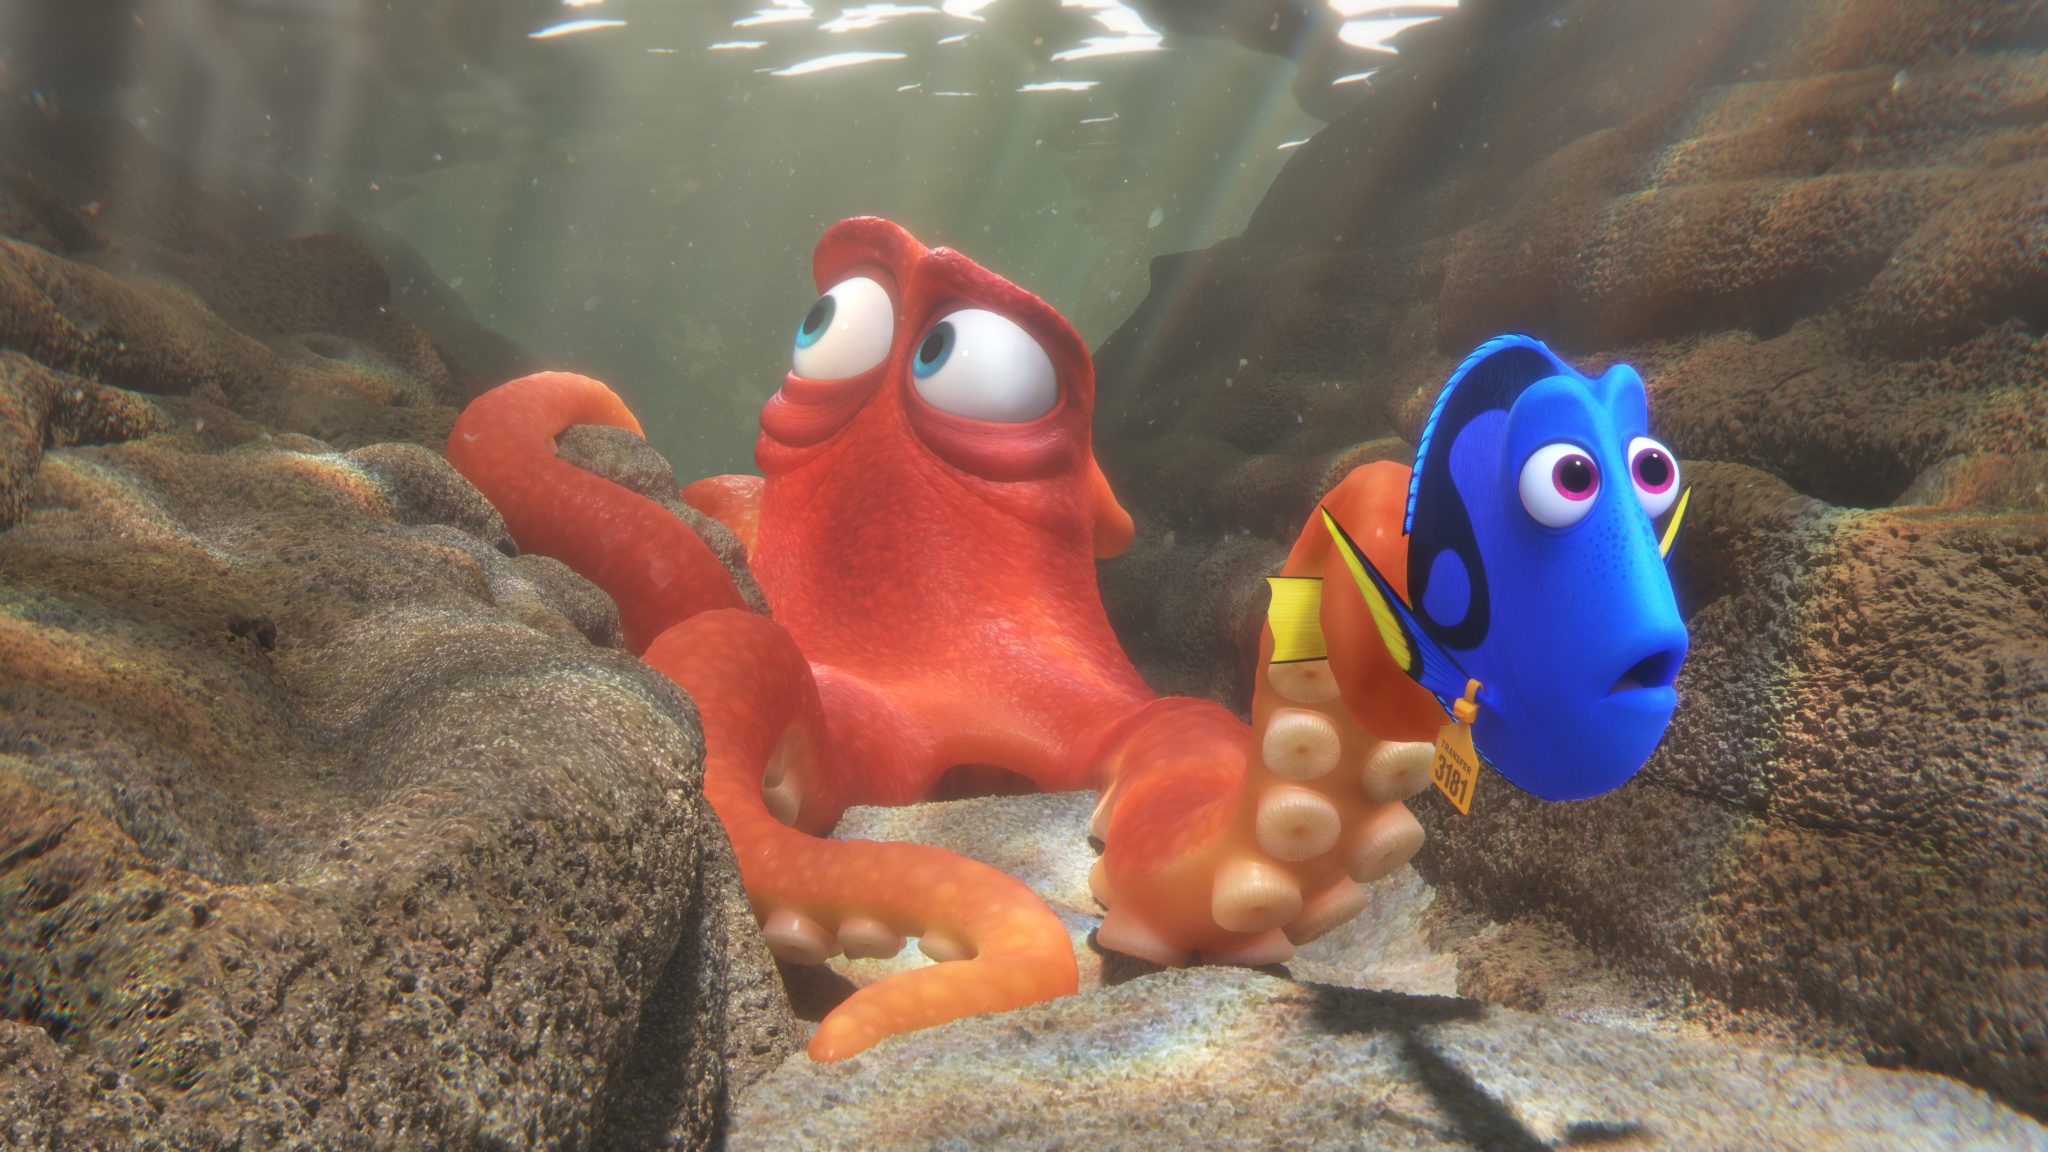 Celebrate World Septopus Day with Hank from Disney-Pixar’s Finding Dory!